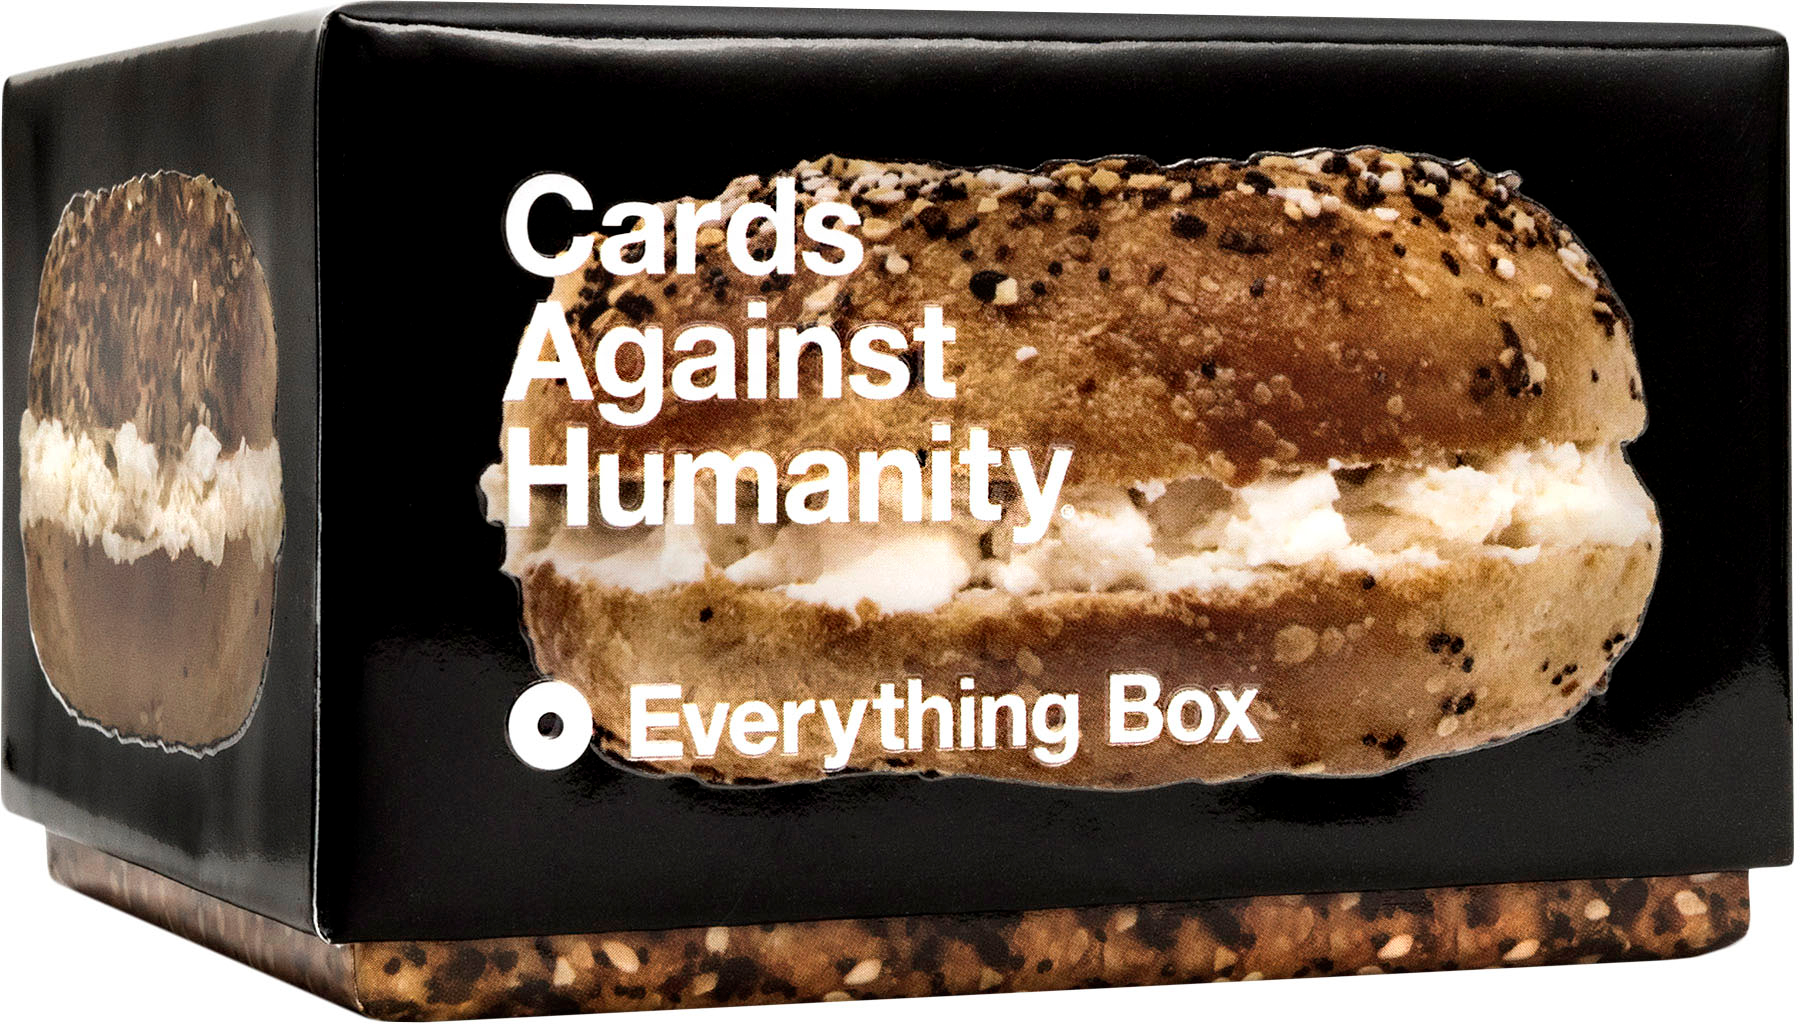 Left View: Cards Against Humanity - Cards Against Humanity: Everything Box - Black/White